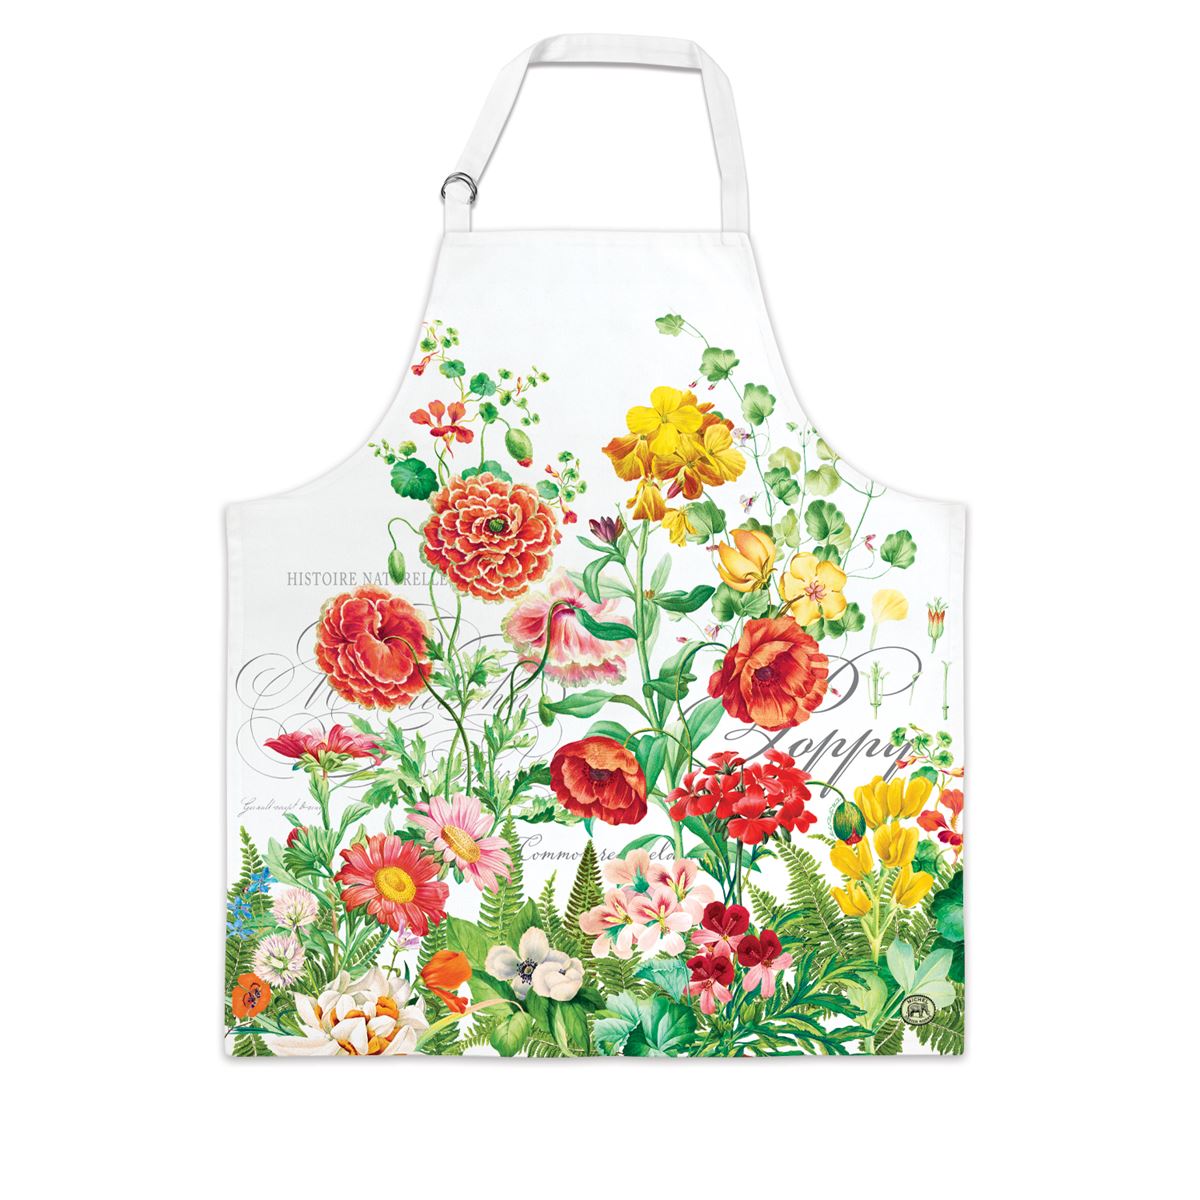 Michel Design Works - Poppies and Posies Apron